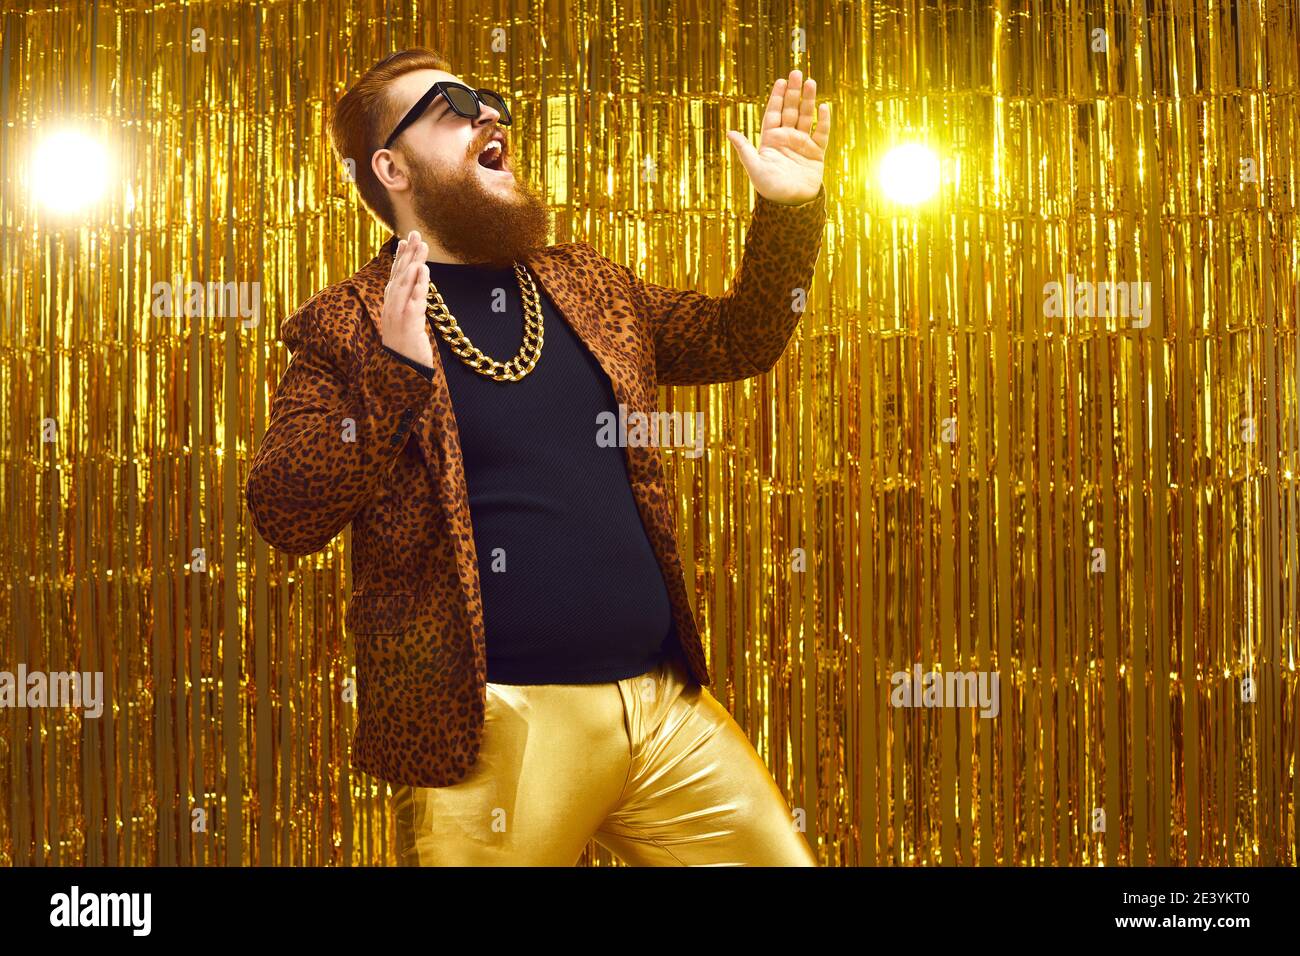 Happy bearded showman singing, dancing and having fun on stage with golden background Stock Photo